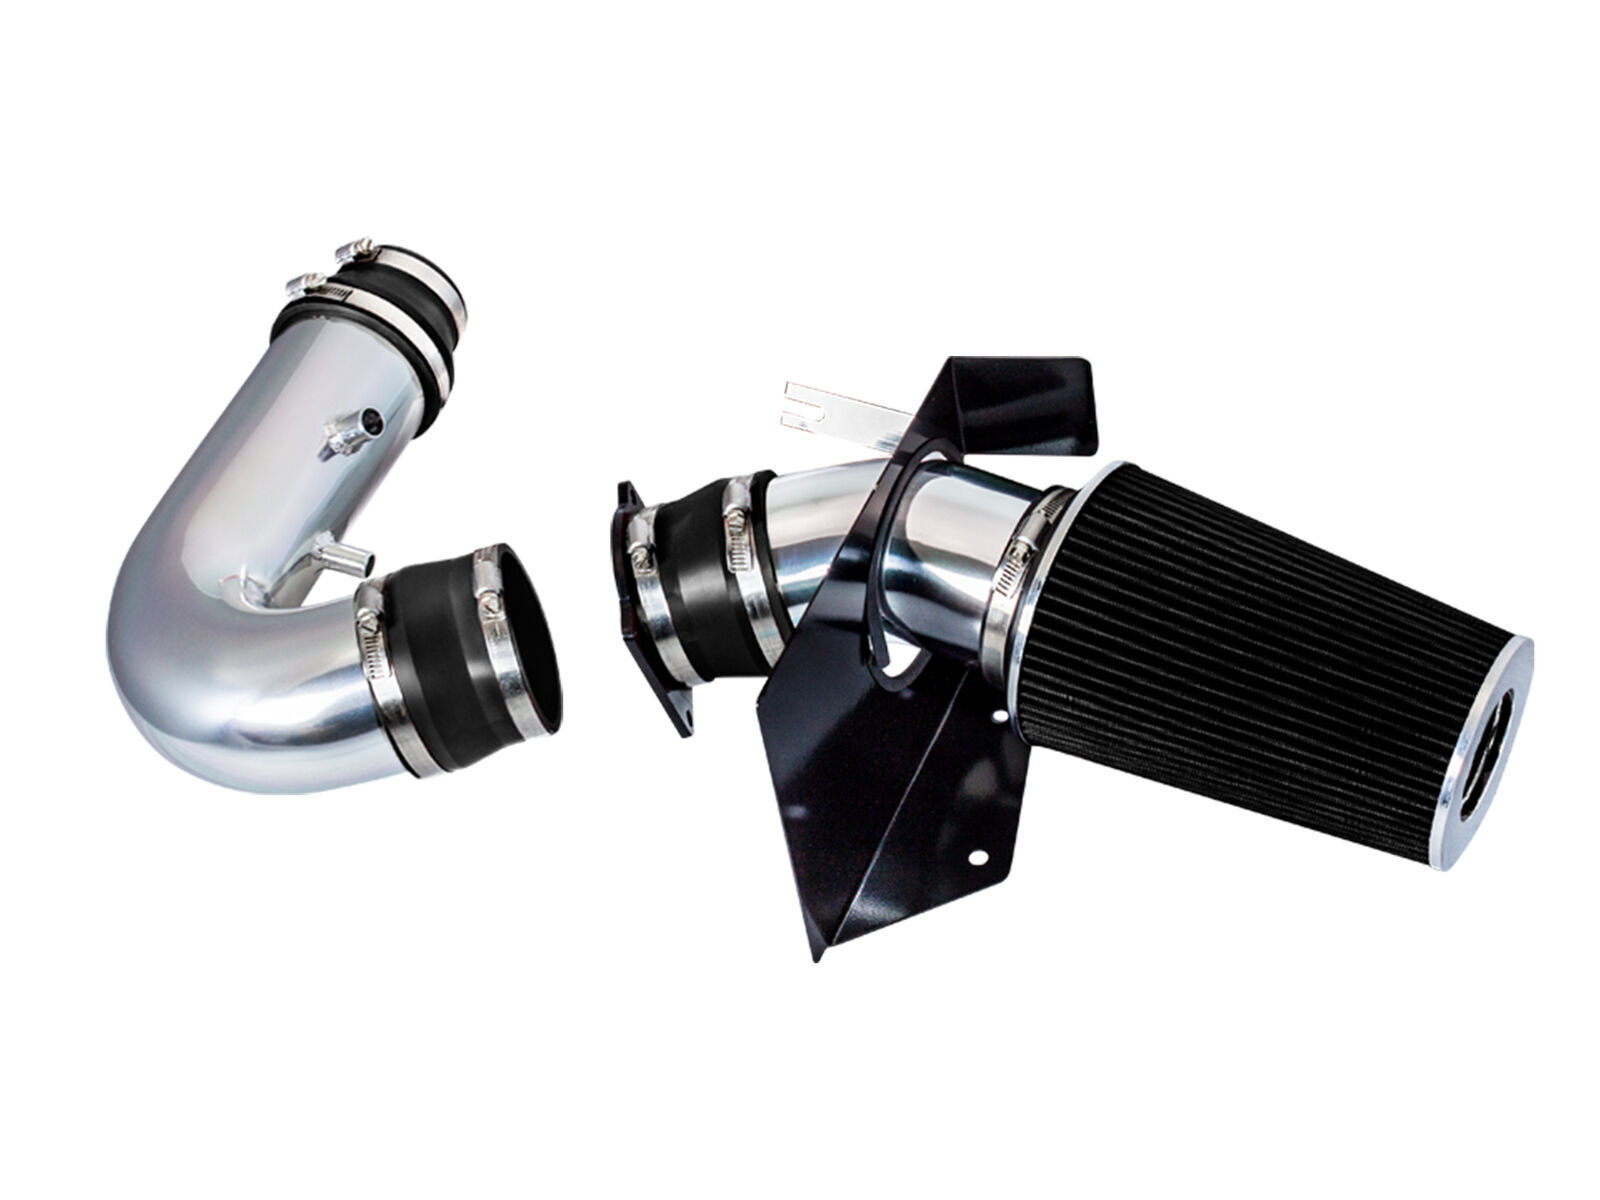 COLD AIR INTAKE + Heat Shield for Ford 97-03 F150 Expedition 4.6 5.4 Black